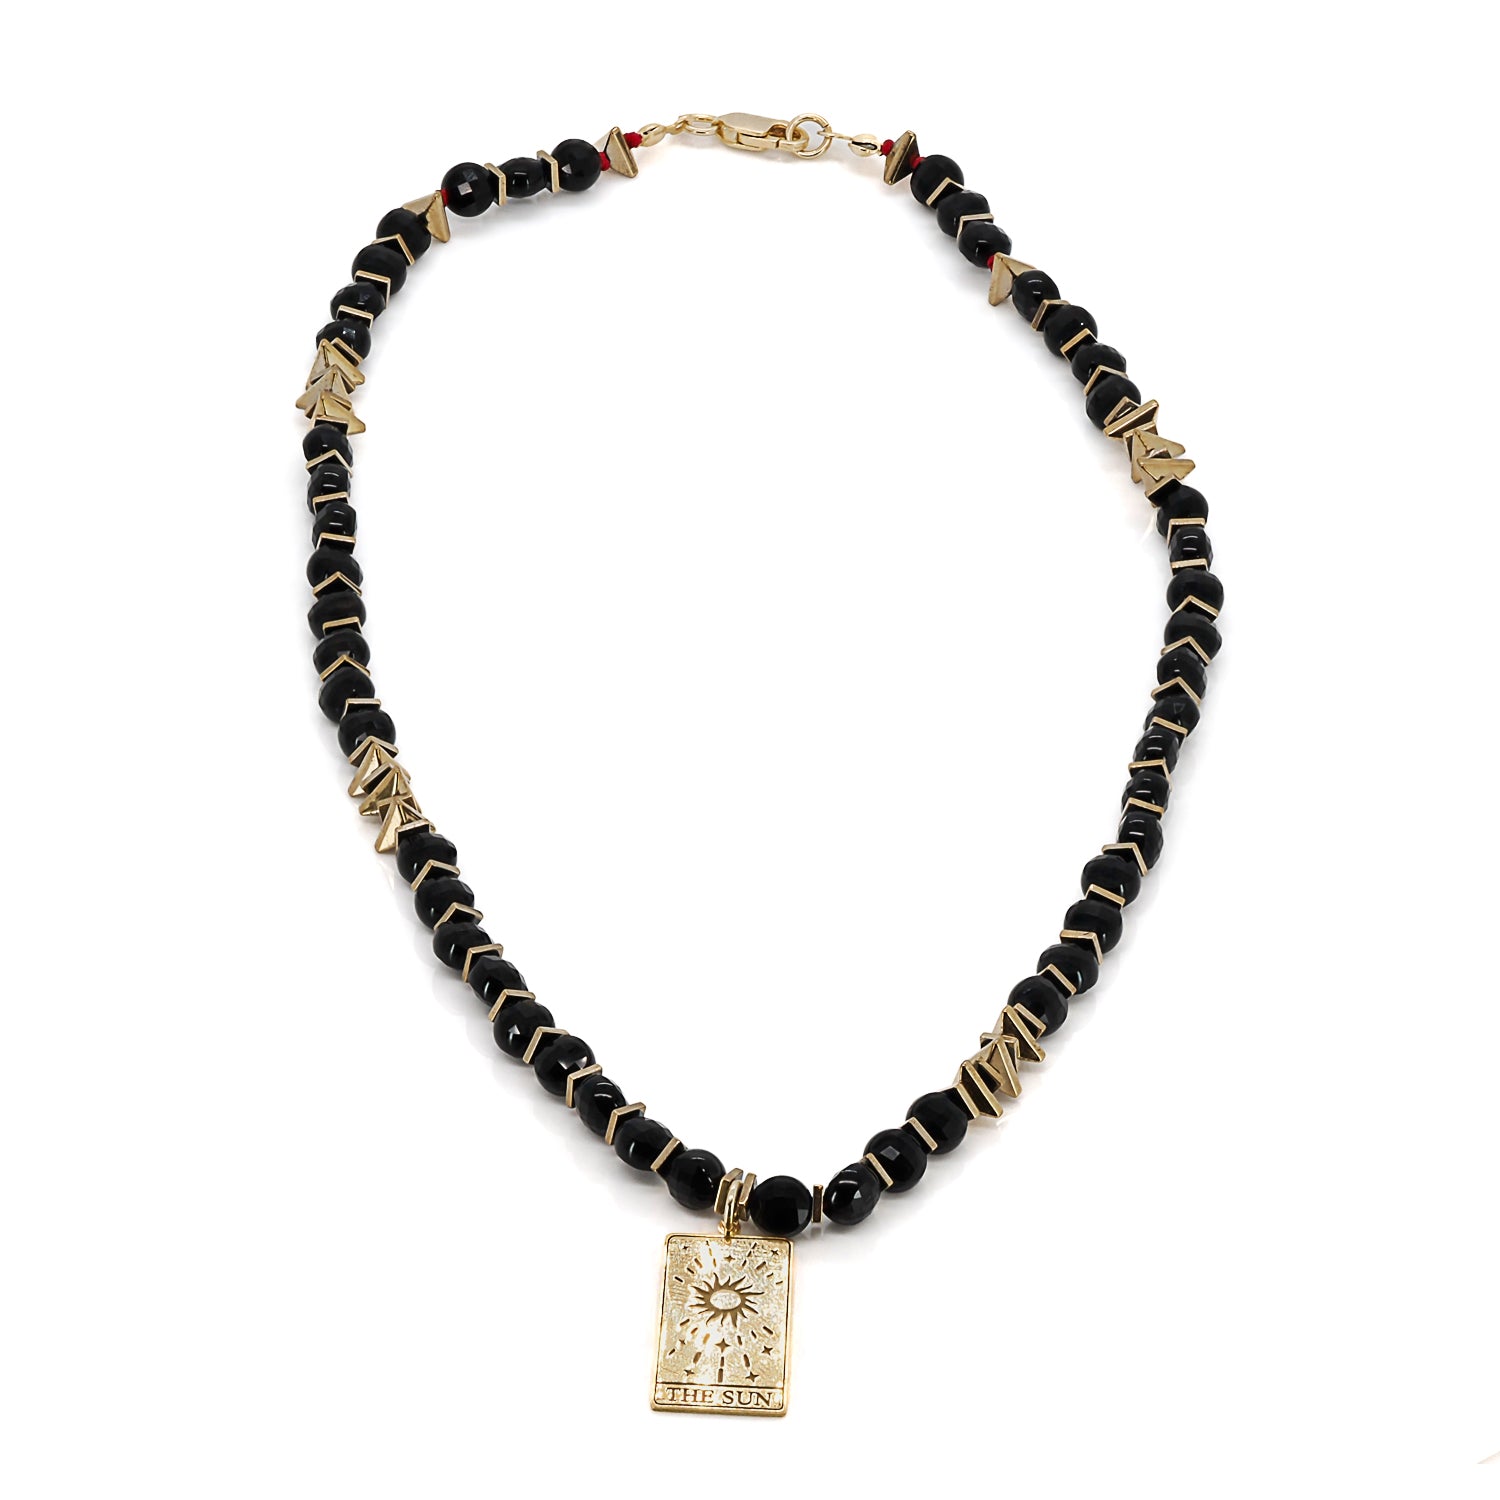 Contemporary Elegance: Black Onyx Beads and Gold Hematite Spacers in 18'' Necklace